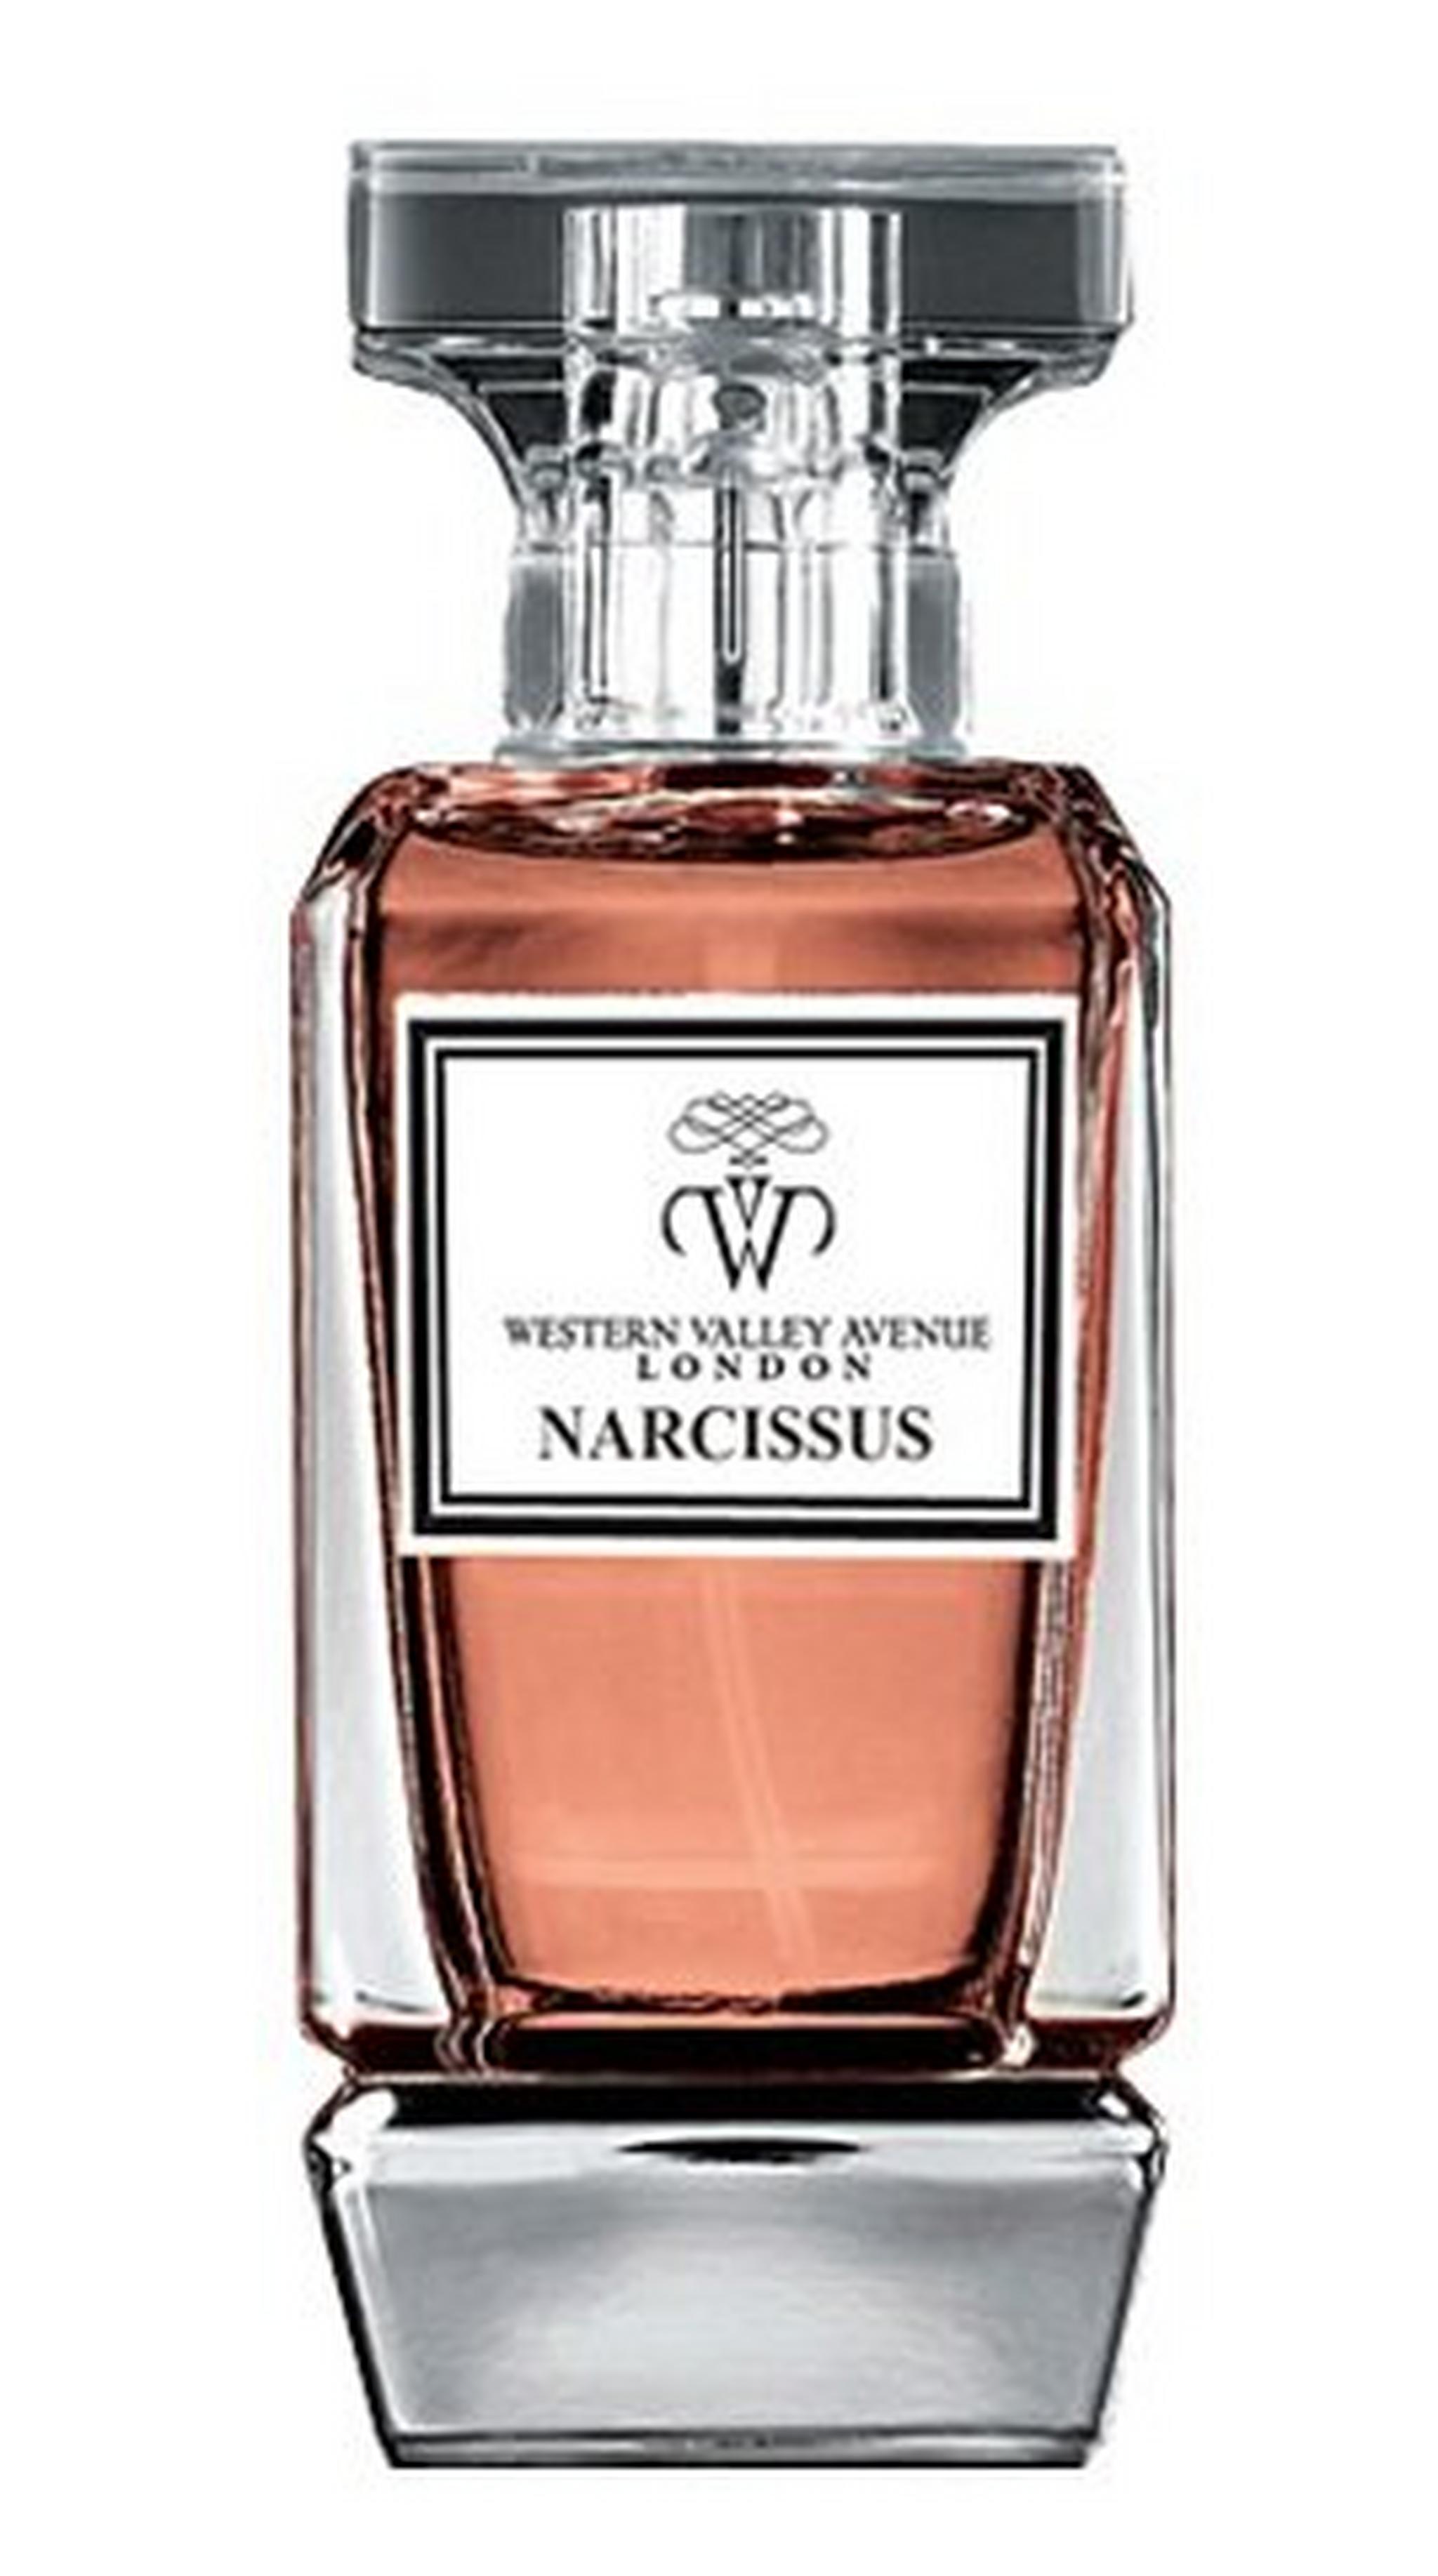 Western Valley Avenue London Narcissus perfume for Women 75ml